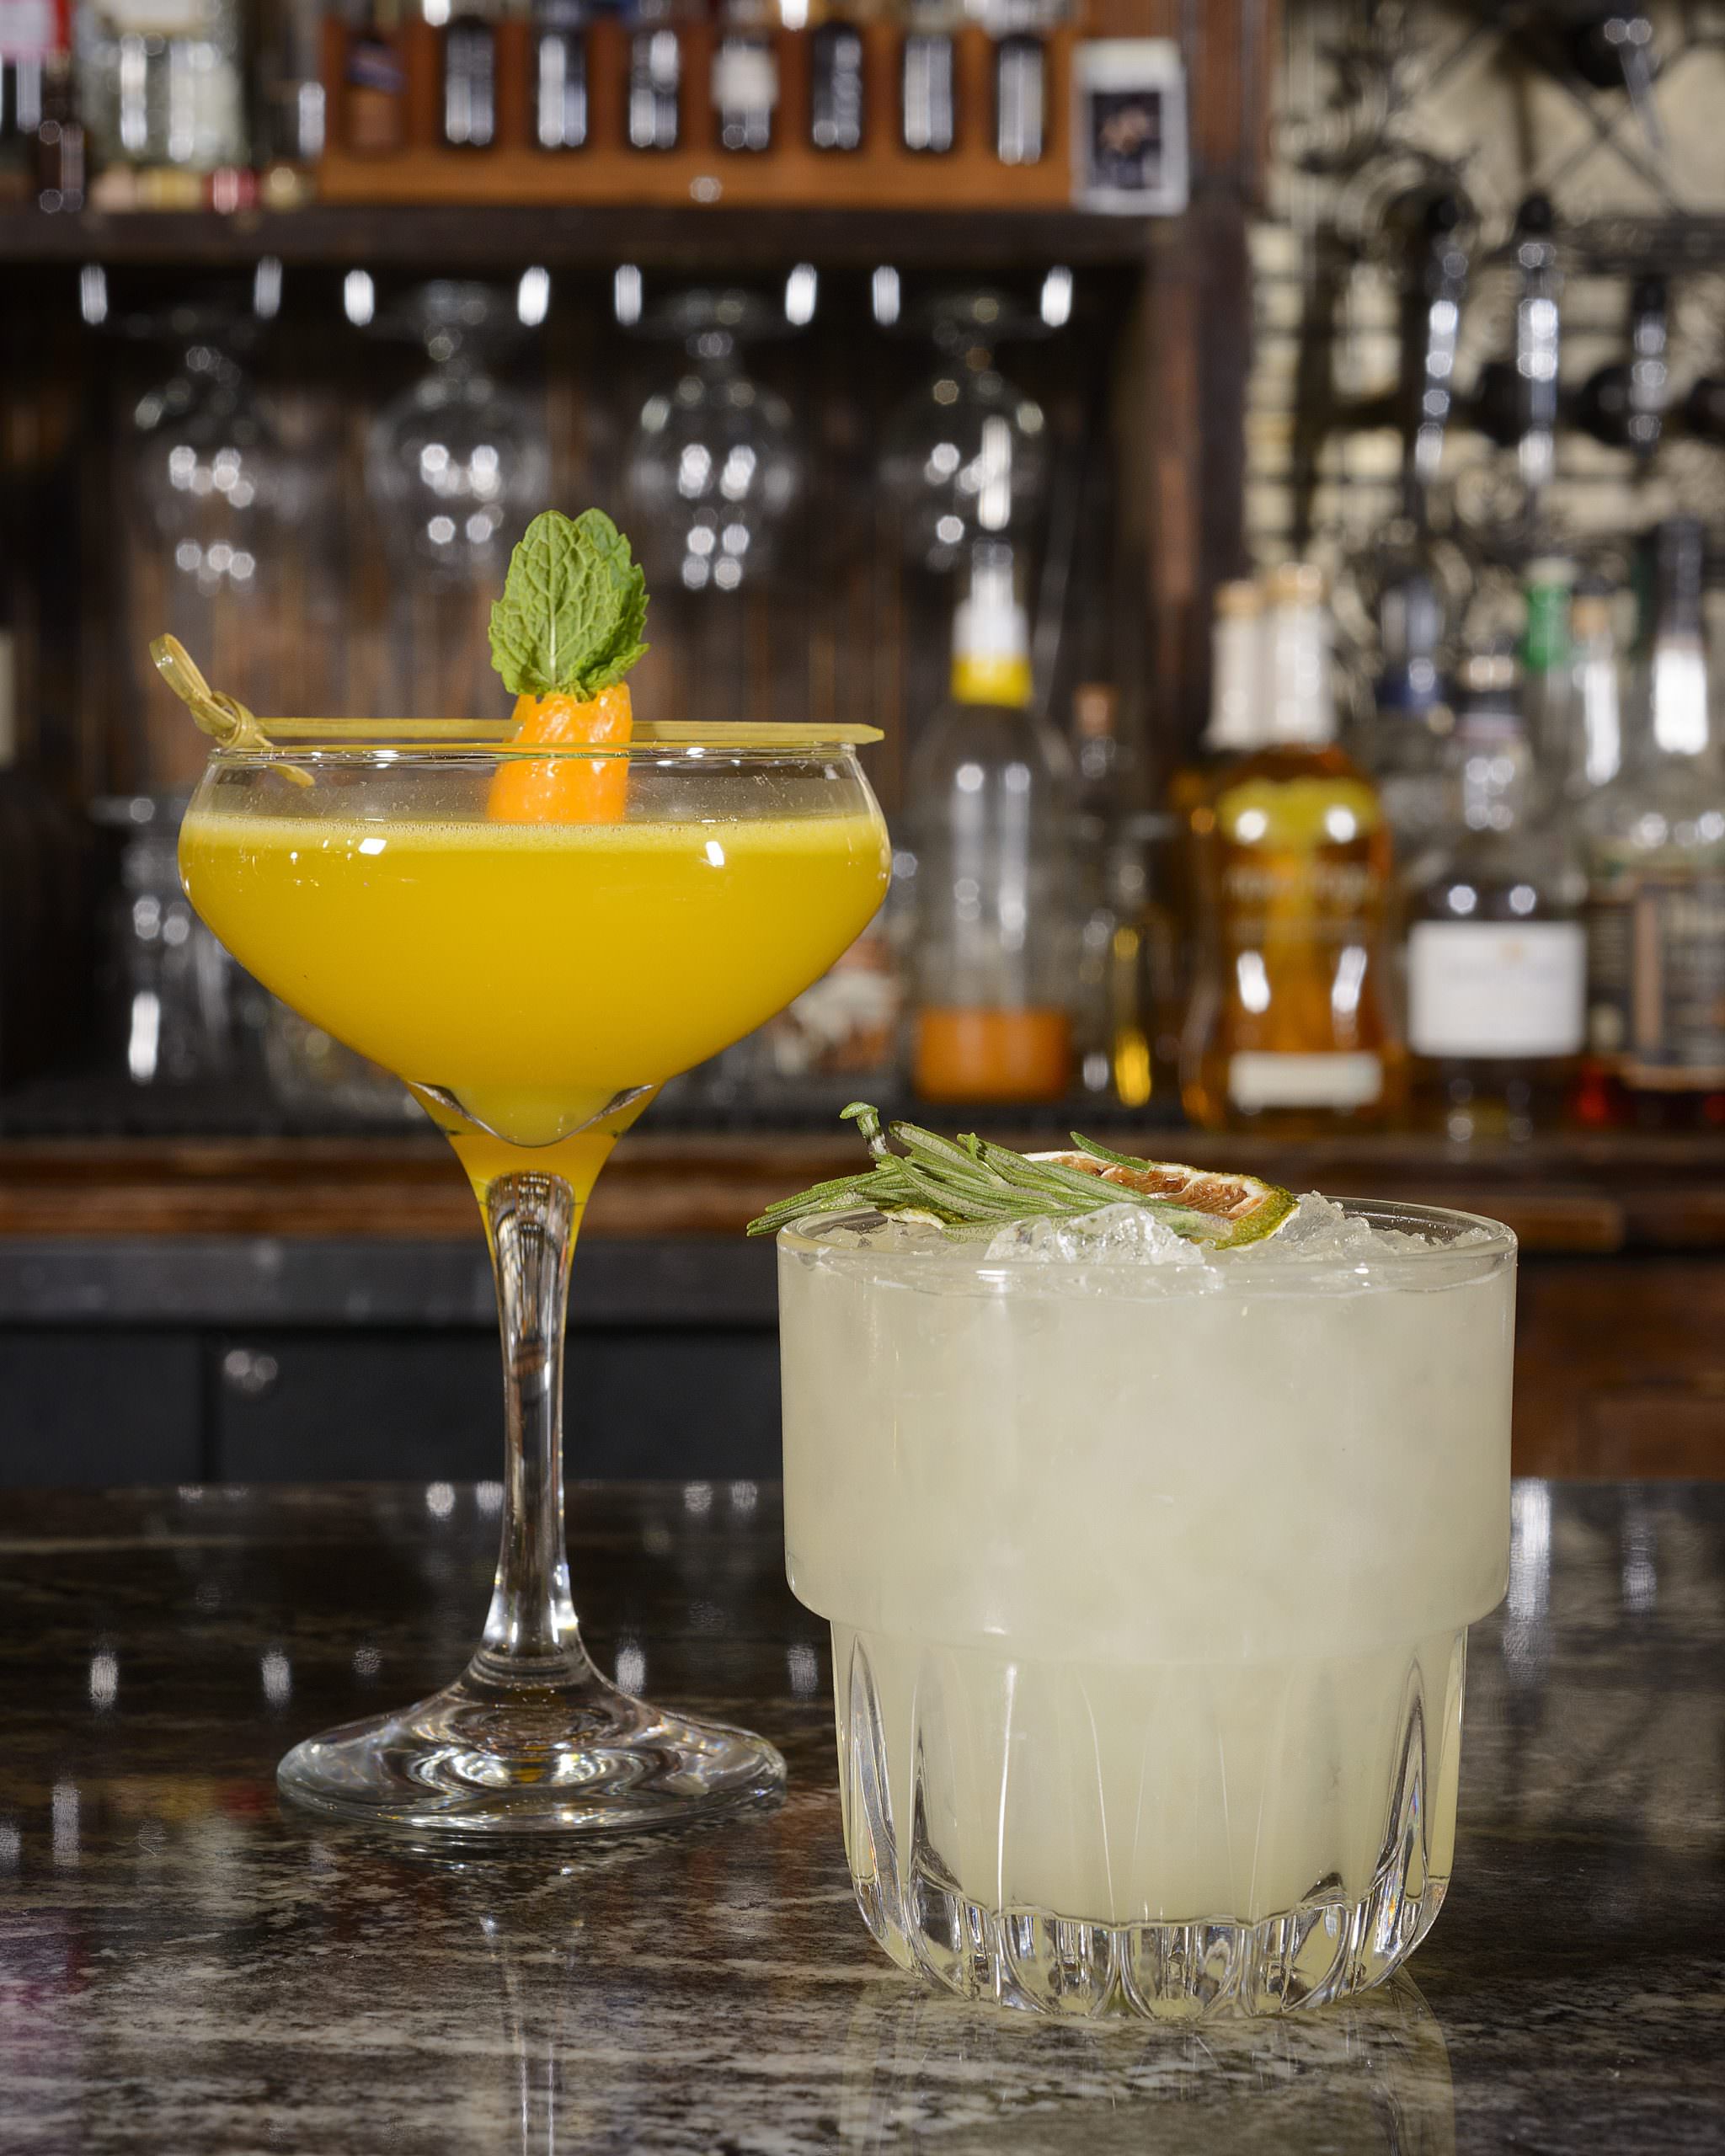 From left, the Silly Wabbit and the Lazy Daisy are CBD cocktails now available at 1864 Tavern appearing on the bar